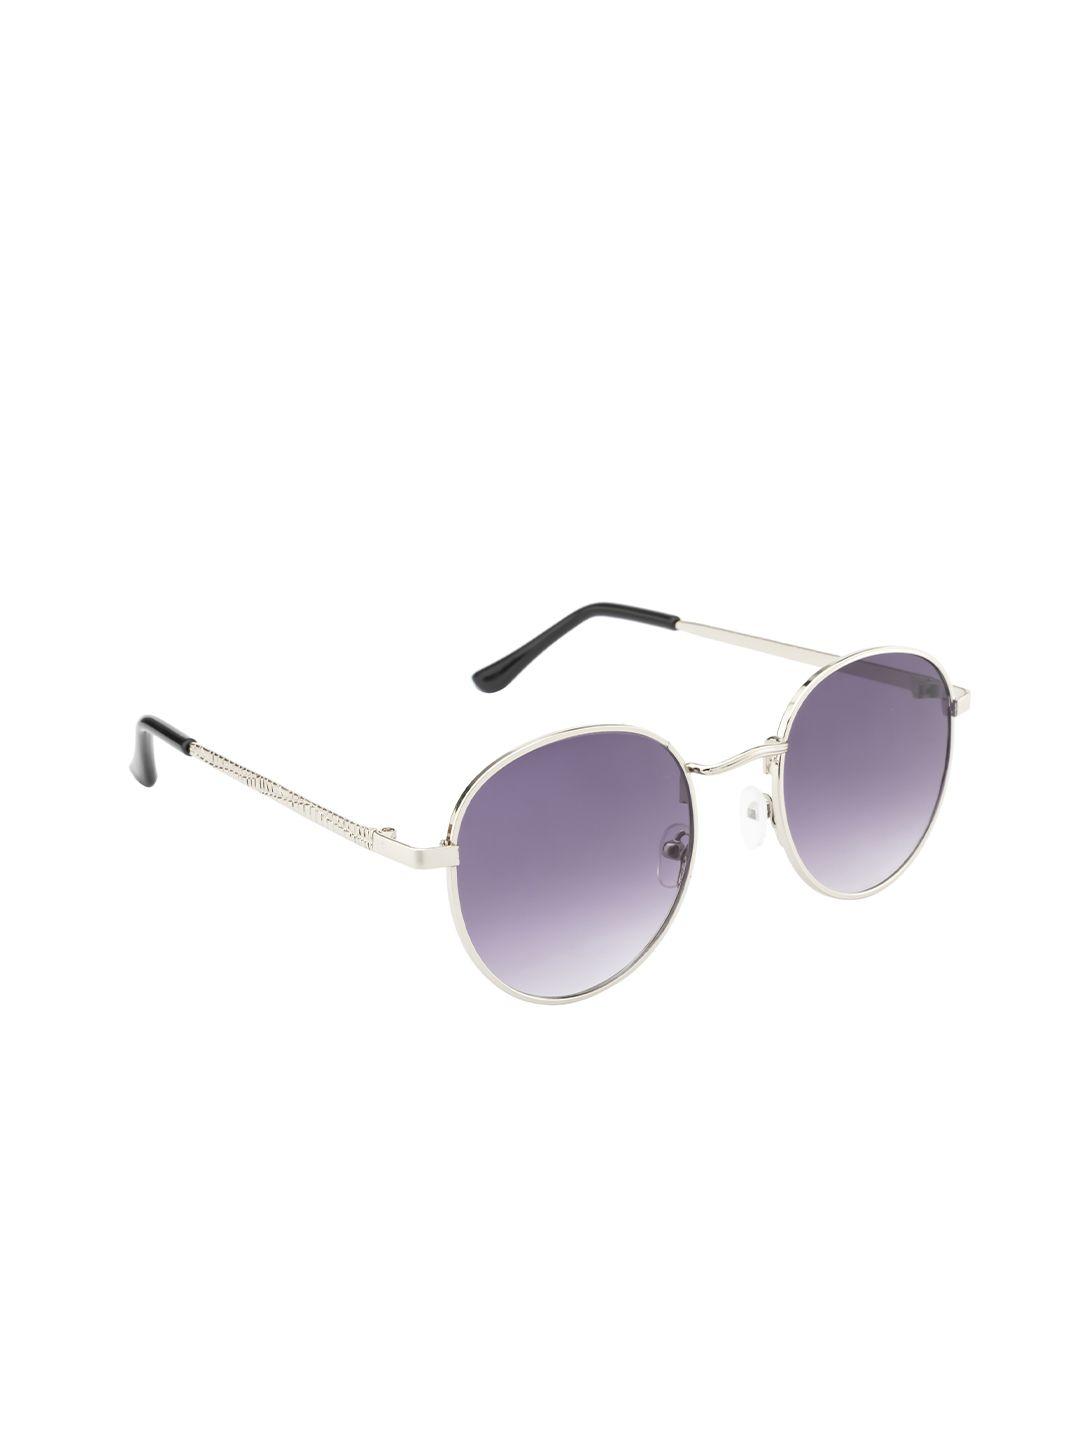 dressberry-women-round-sunglasses-with-uv-protected-lens-m23135